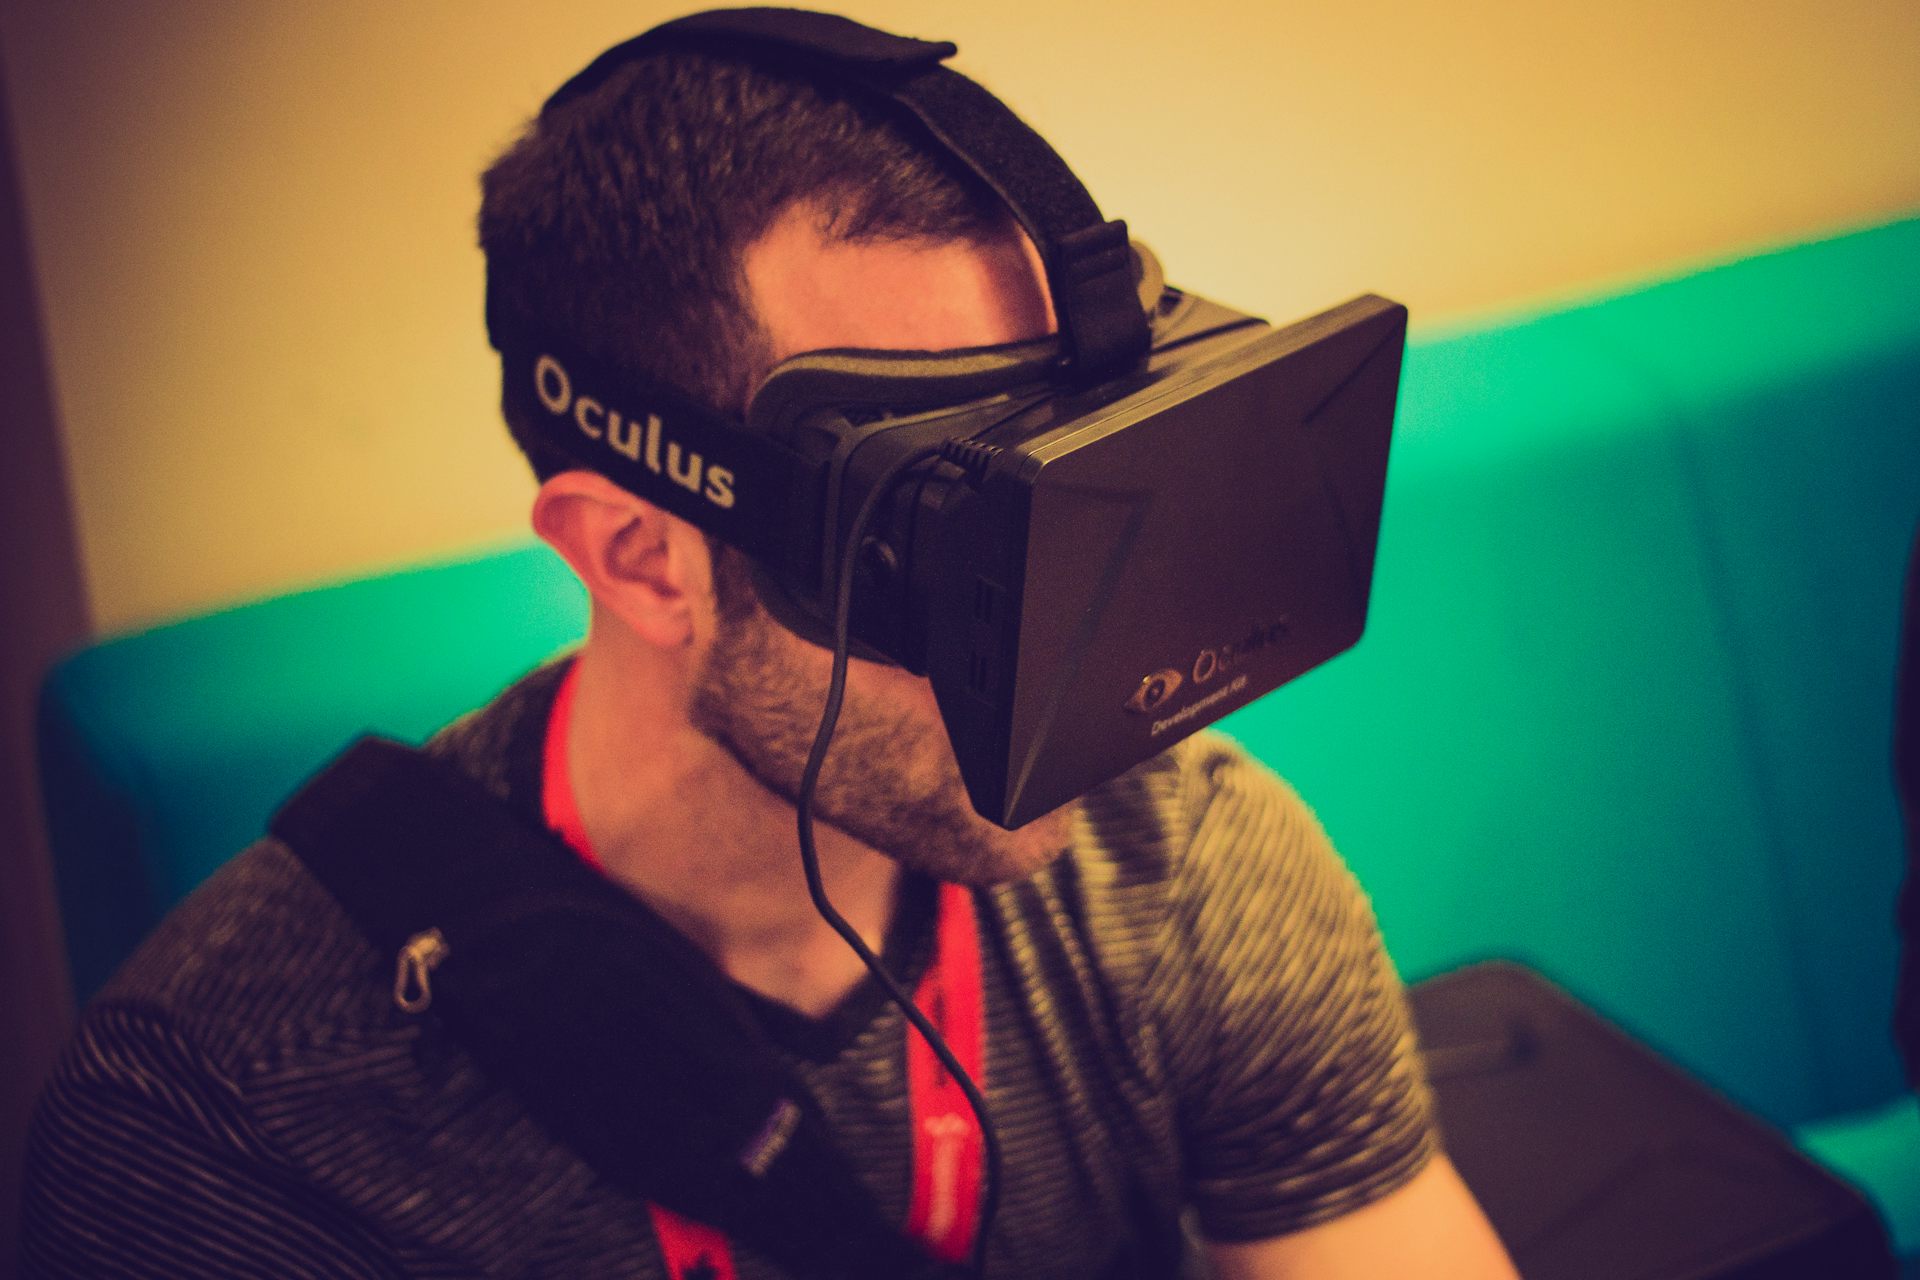 how much is a used oculus rift worth